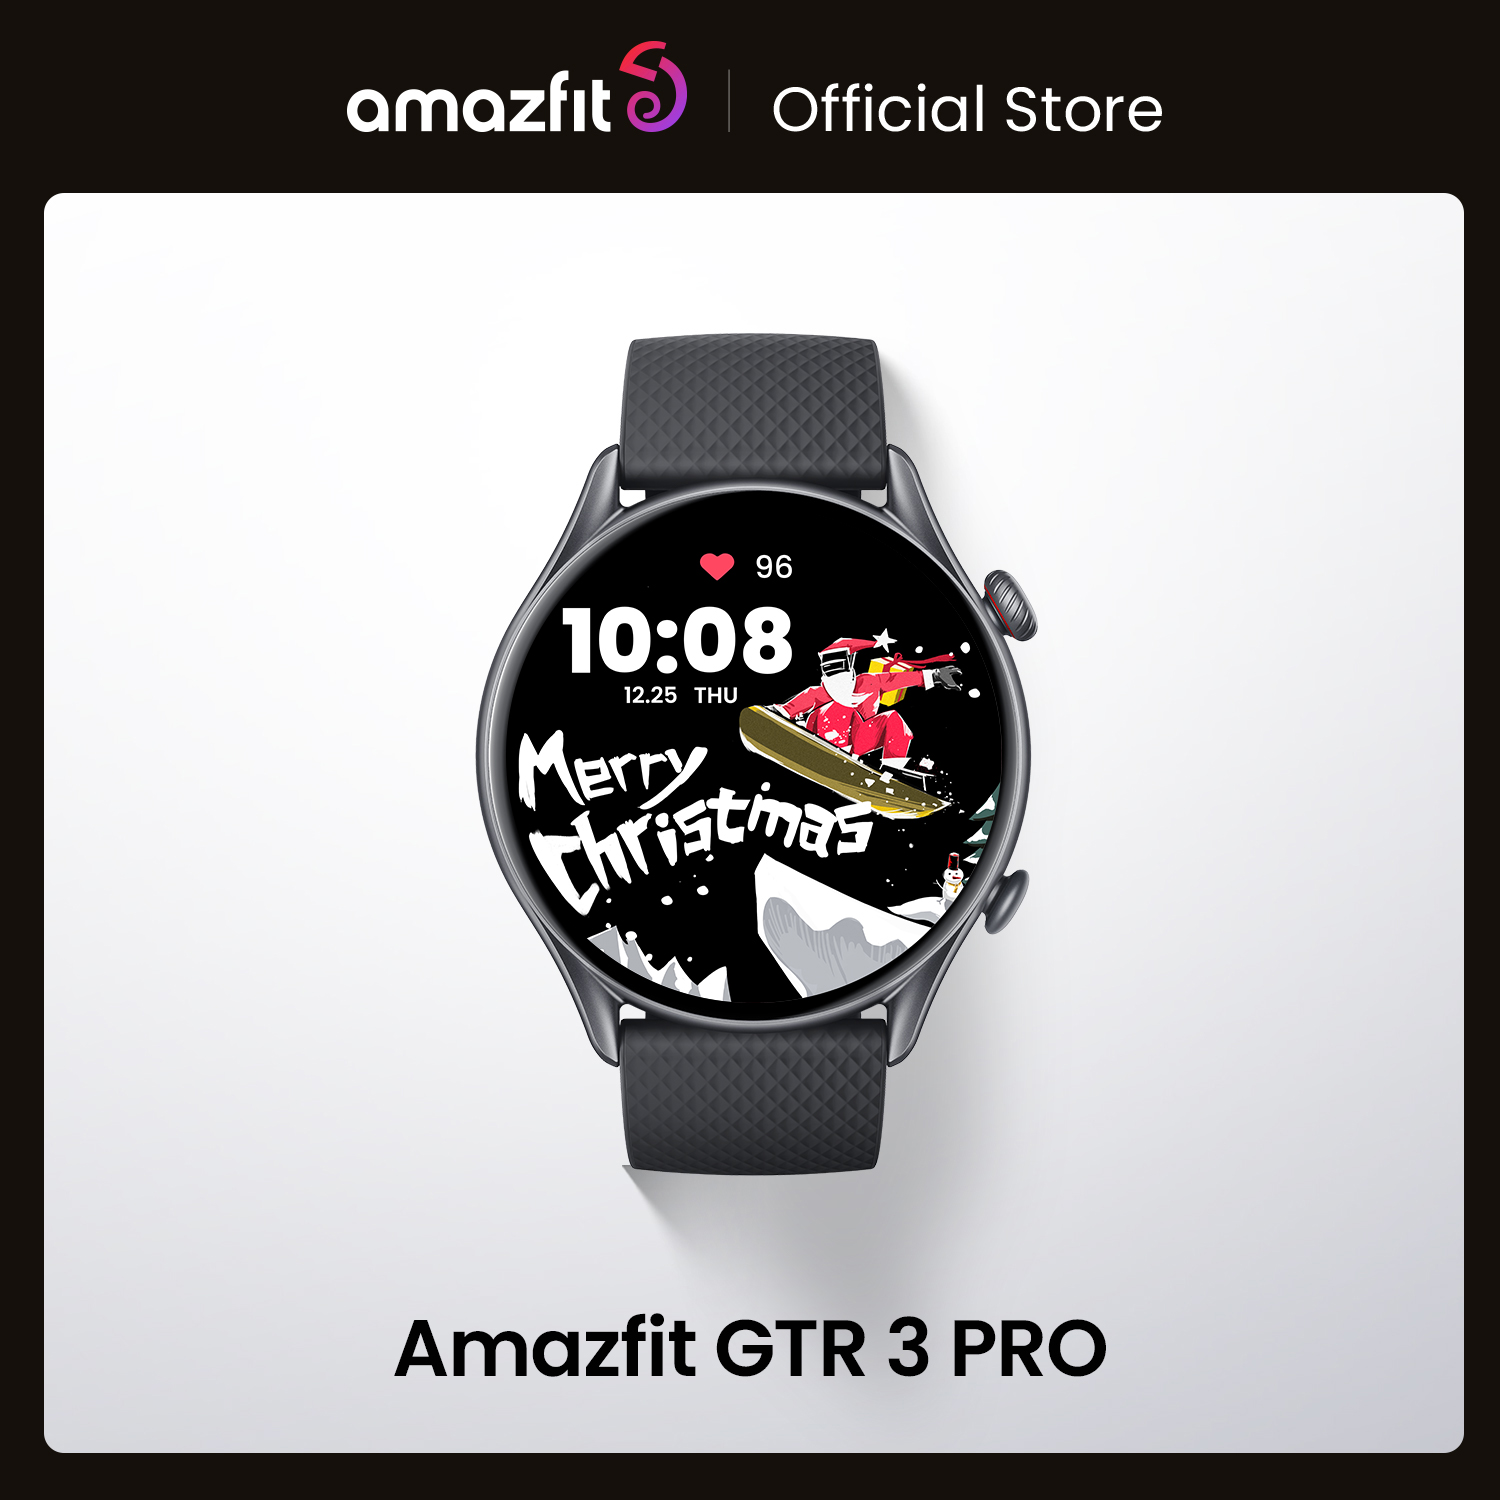 Amazfit GTR 3 and GTR 3 Pro - Zepp OS, AMOLED screens, water protection,  SpO2 and up to 35 days of battery life from $180